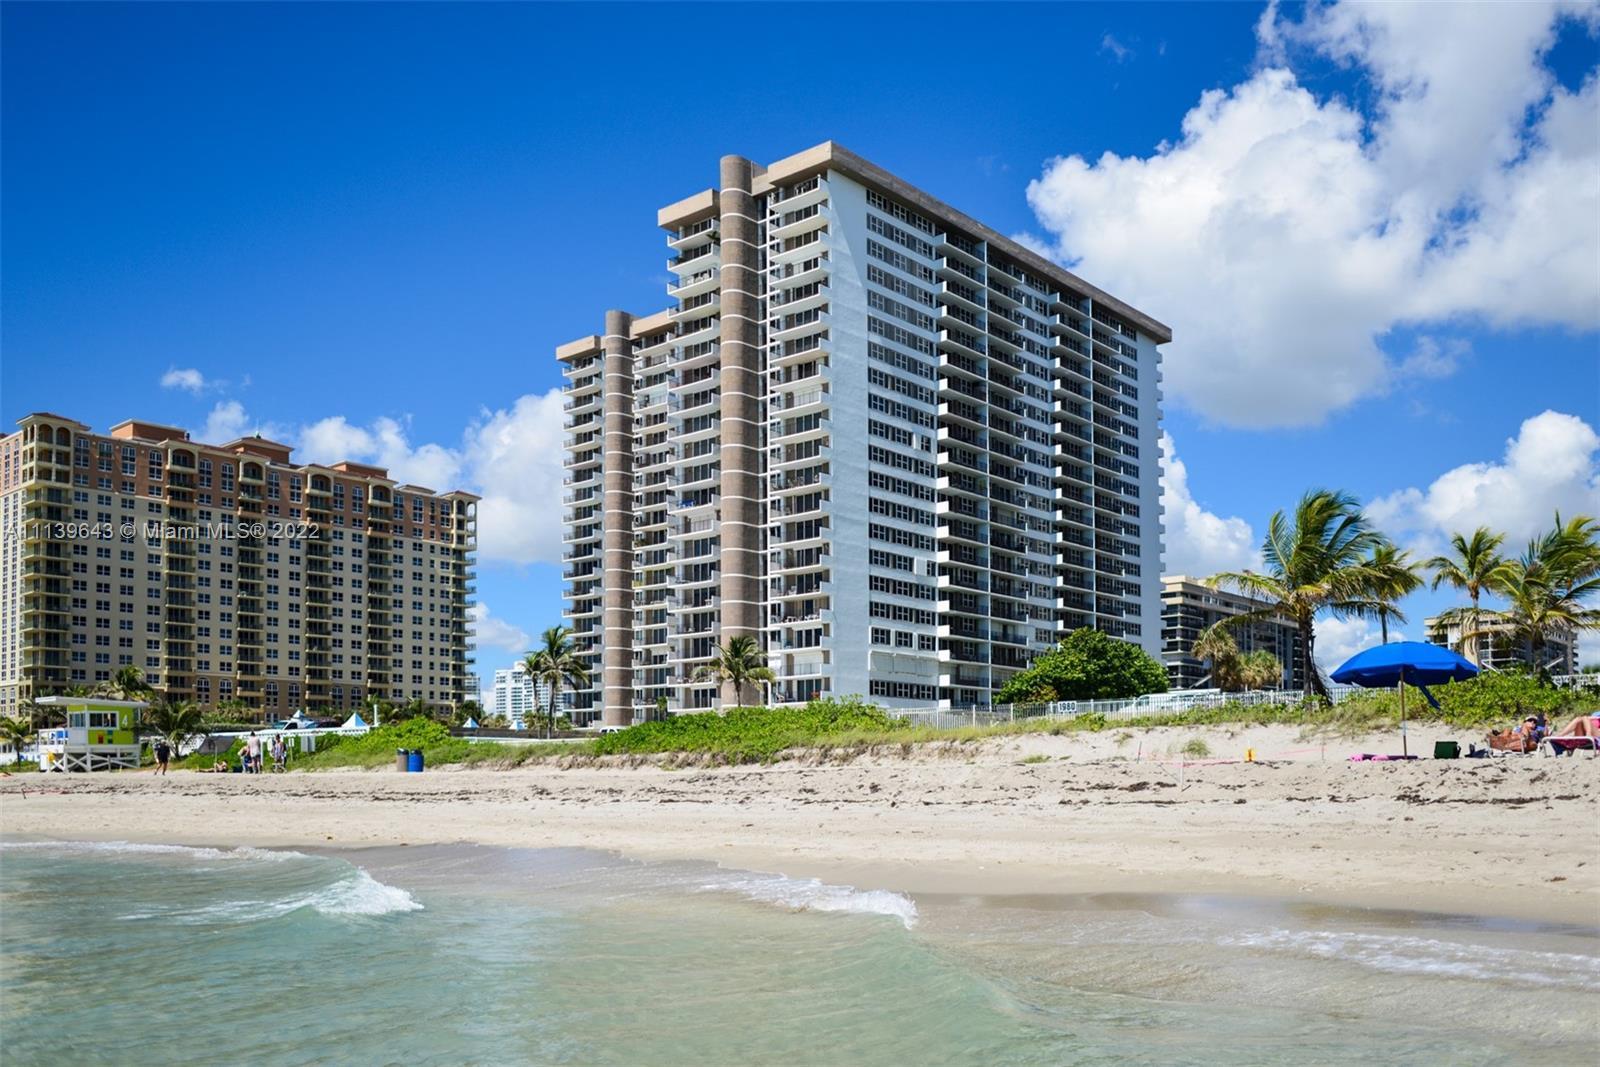 This 2 Bedroom 2 Bath condo faces North with a gorgeous view of the ocean.  Has Hurricane impact sli